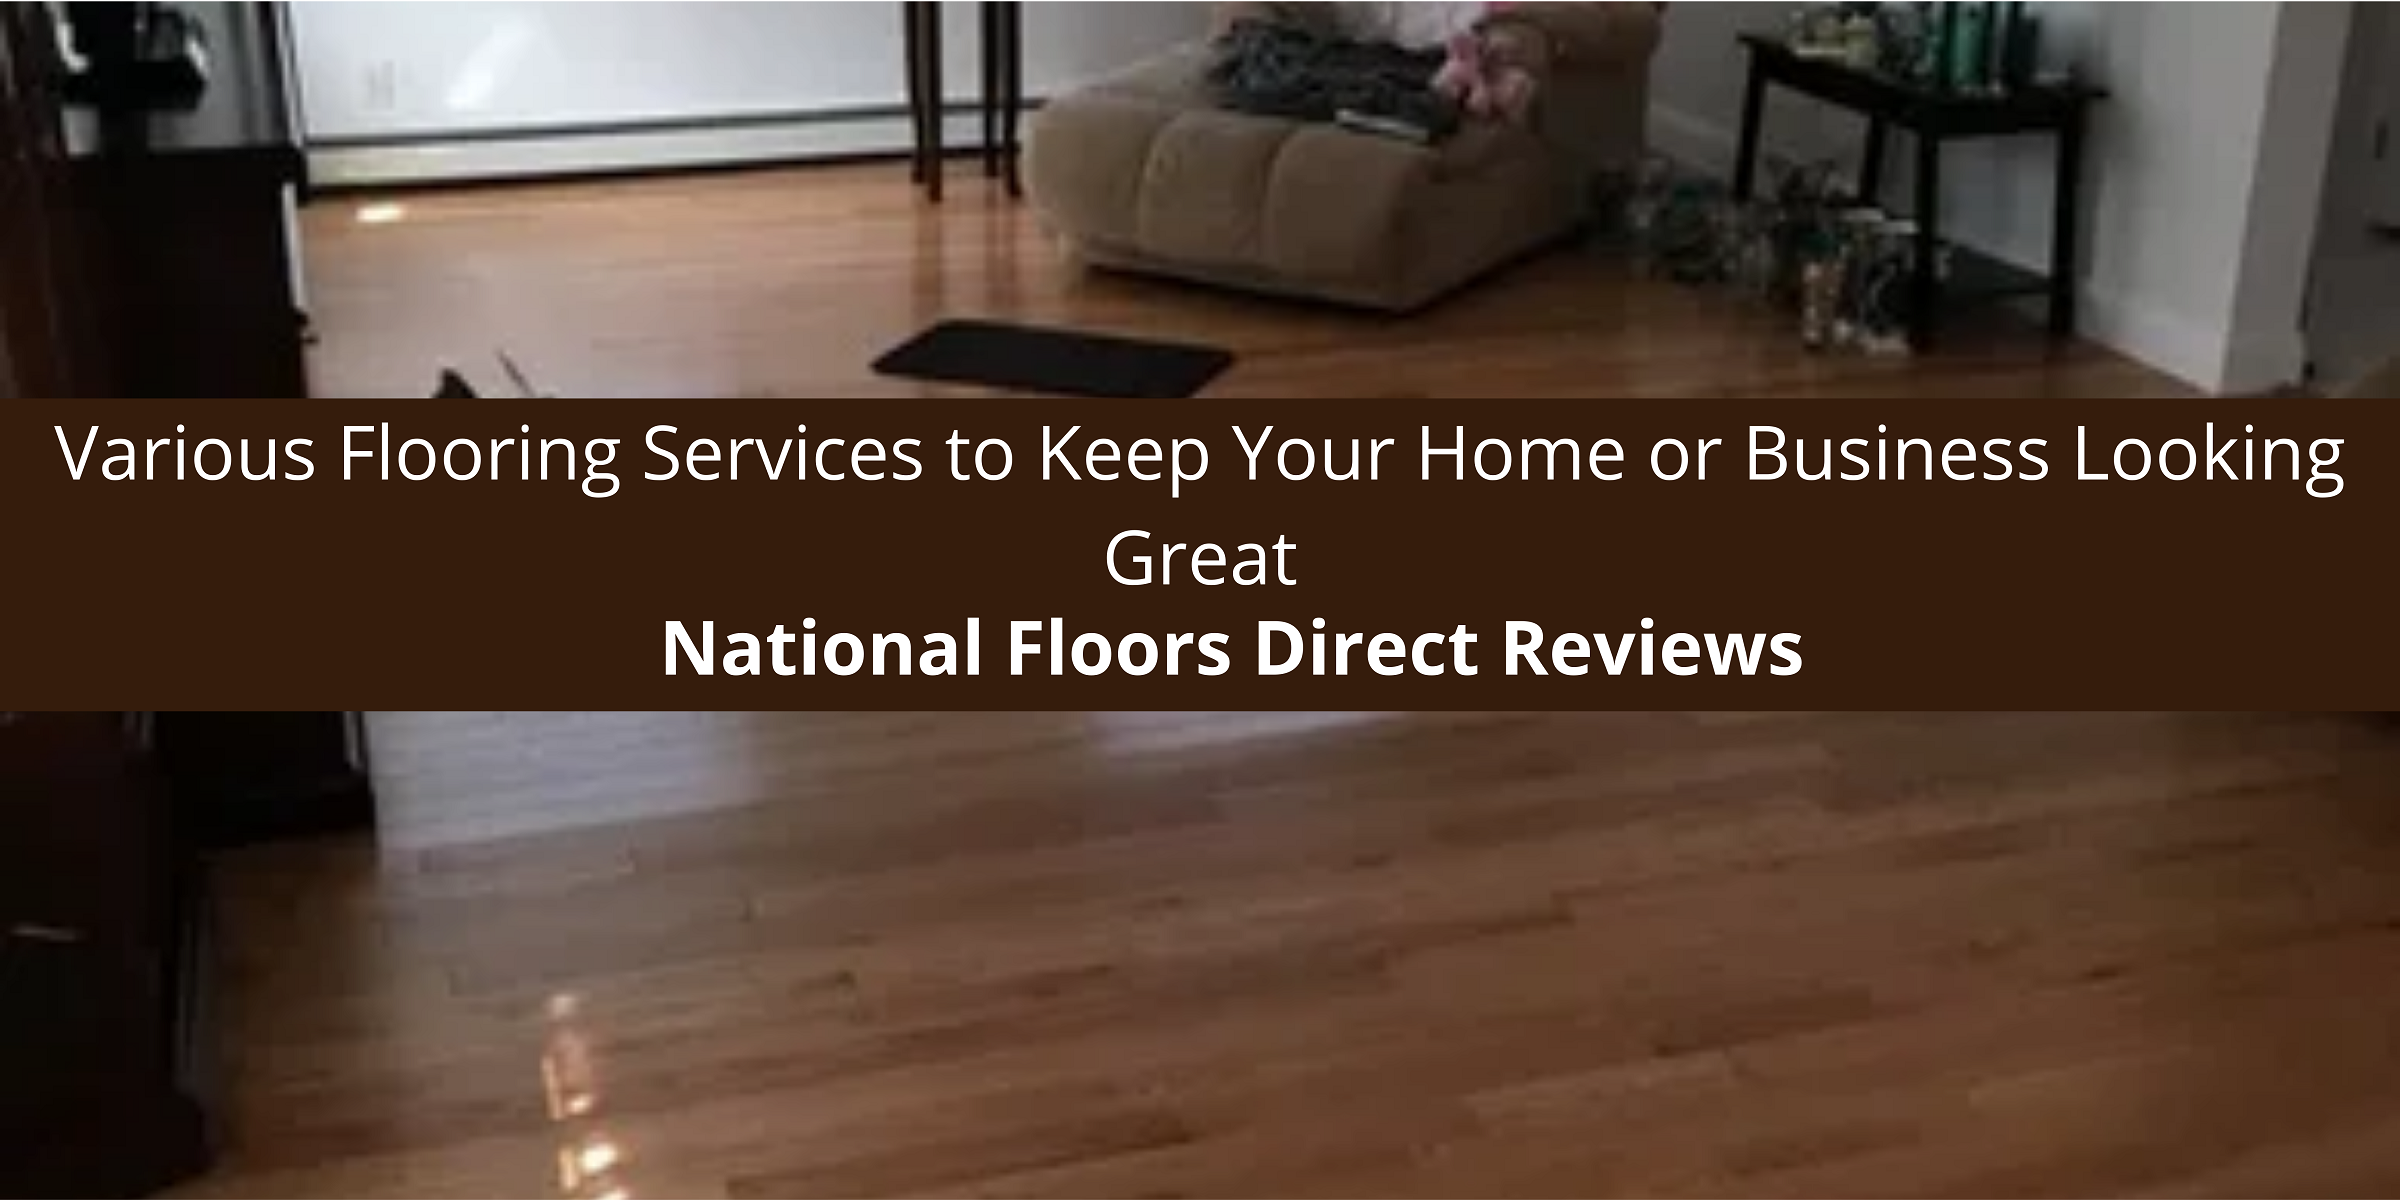 National Floors Direct Offers Various Flooring Services to Keep Your Home or Business Looking Great